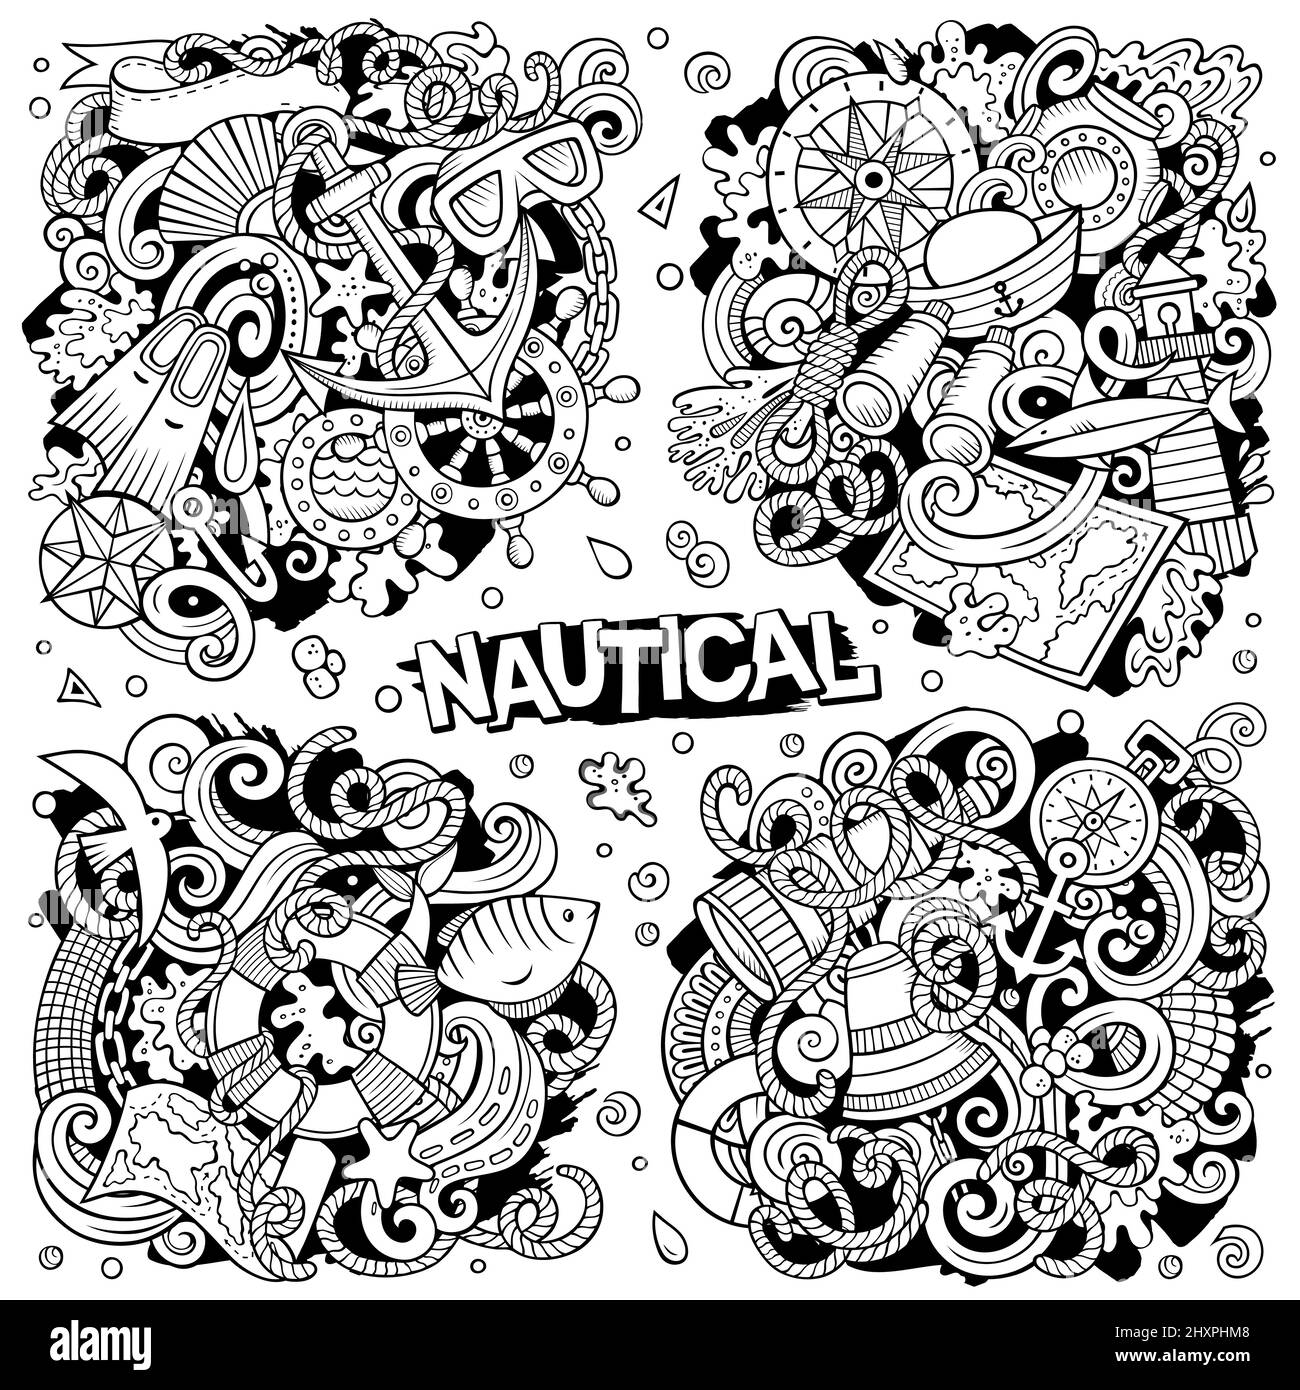 Nautical cartoon vector doodle designs set. Sketchy detailed compositions with lot of maritime objects and symbols. All items are separate Stock Vector